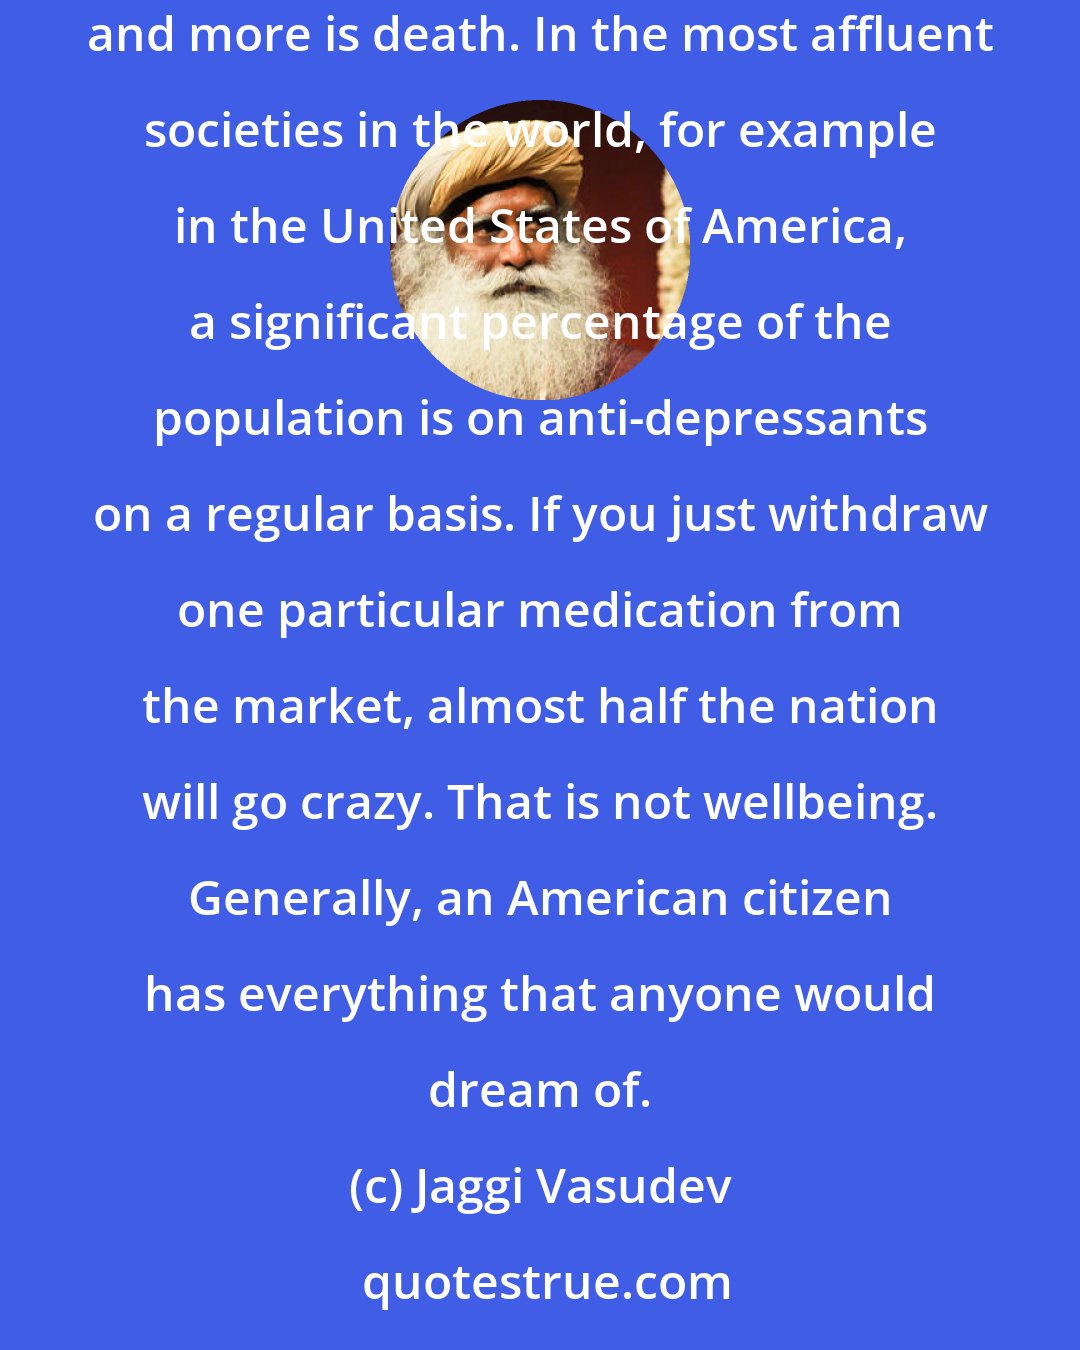 Jaggi Vasudev: We must understand what our idea of wealth is. Is it just about more buildings, more machines, more cars, more of everything? More and more is death. In the most affluent societies in the world, for example in the United States of America, a significant percentage of the population is on anti-depressants on a regular basis. If you just withdraw one particular medication from the market, almost half the nation will go crazy. That is not wellbeing. Generally, an American citizen has everything that anyone would dream of.